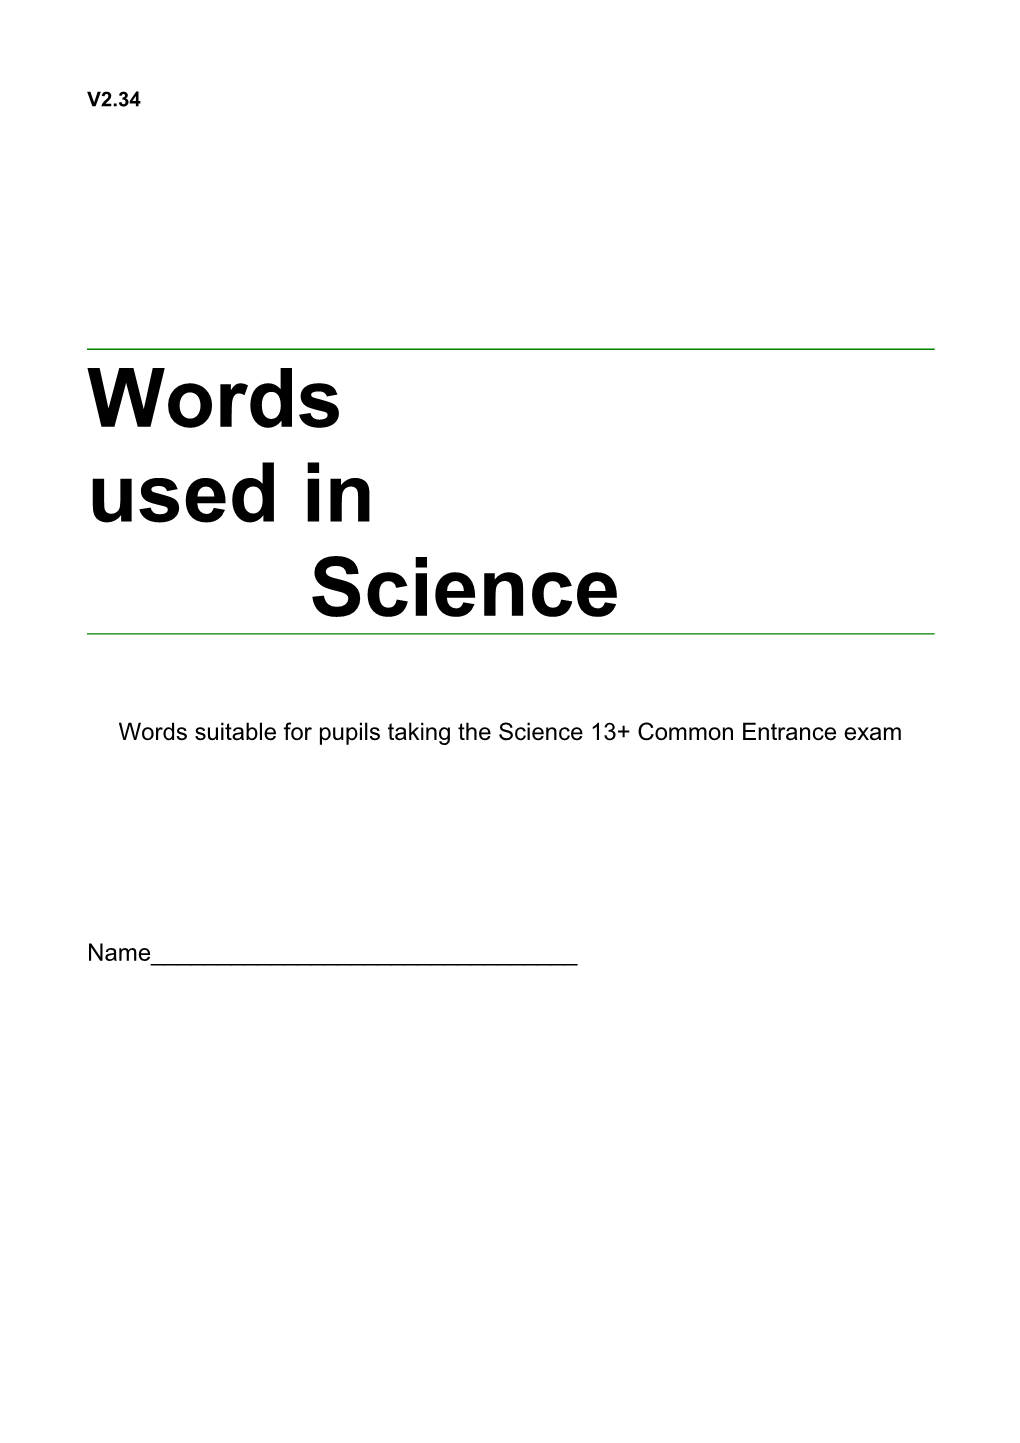 Words Suitable for Pupils Taking the Science 13+ Common Entrance Exam